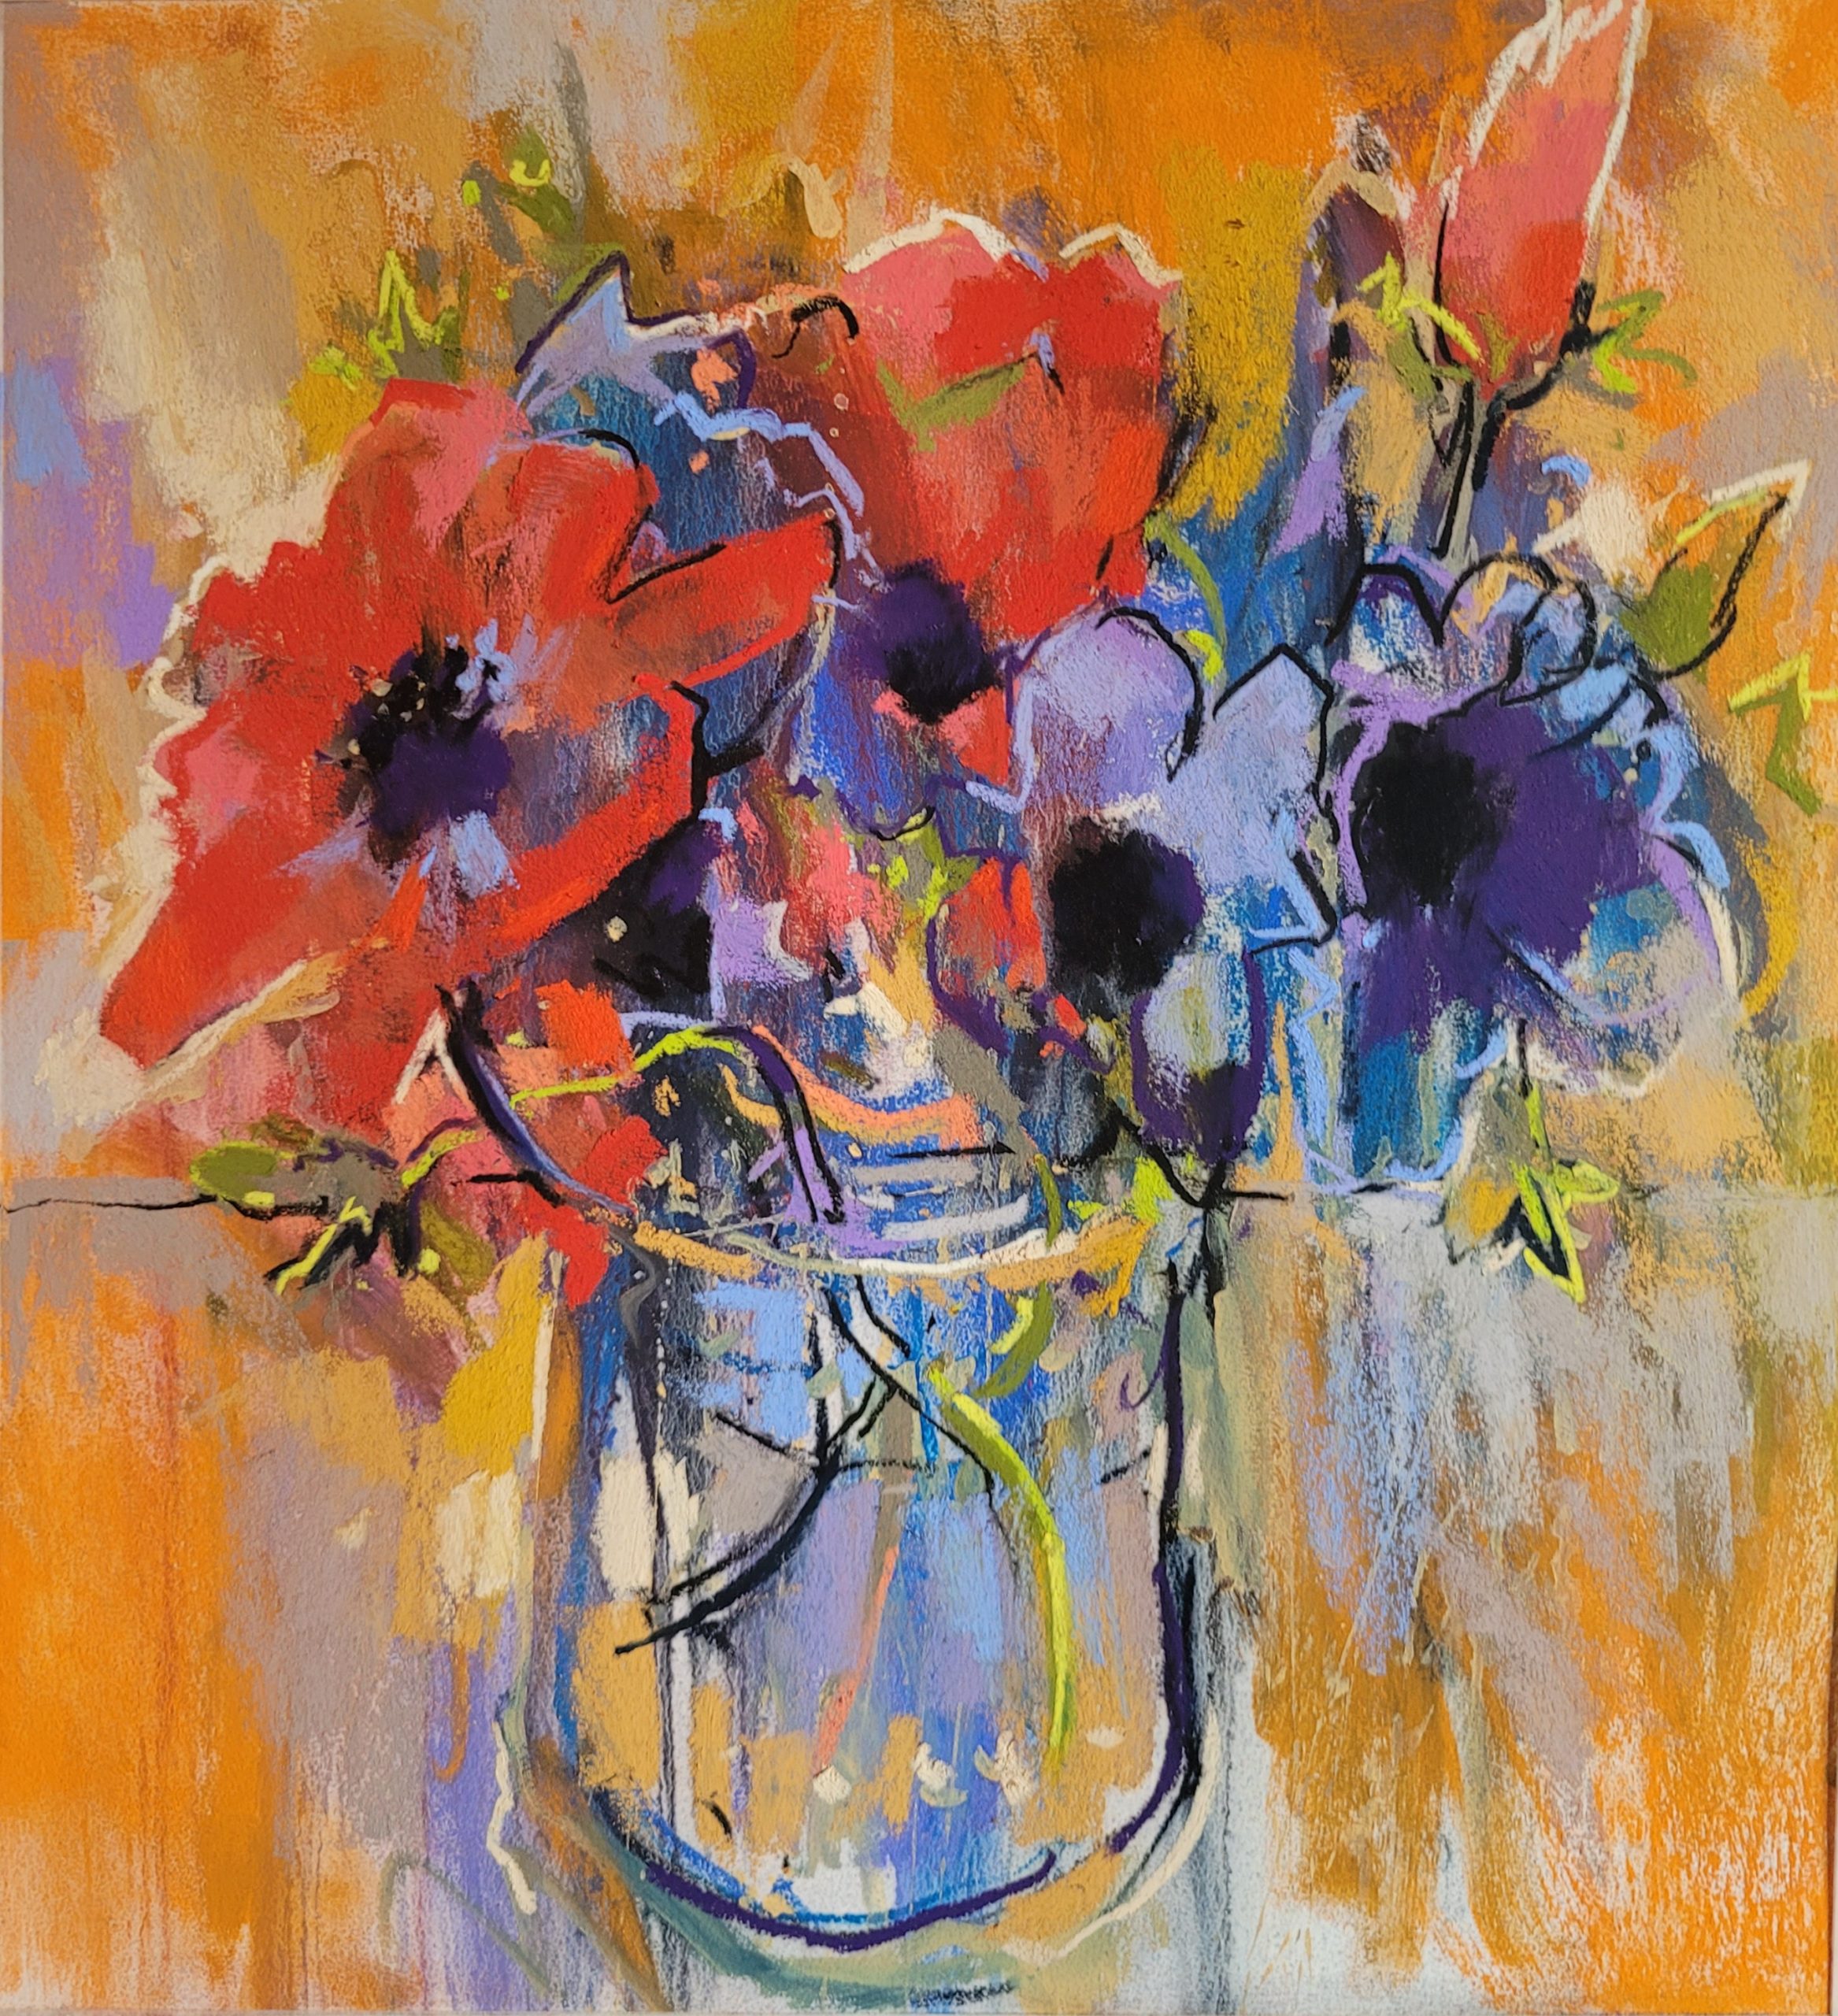 Nixative yes and no - Richard Suckling, "Anemones," mixed pastels on Colourfix Rough paper, 17 x 18 in